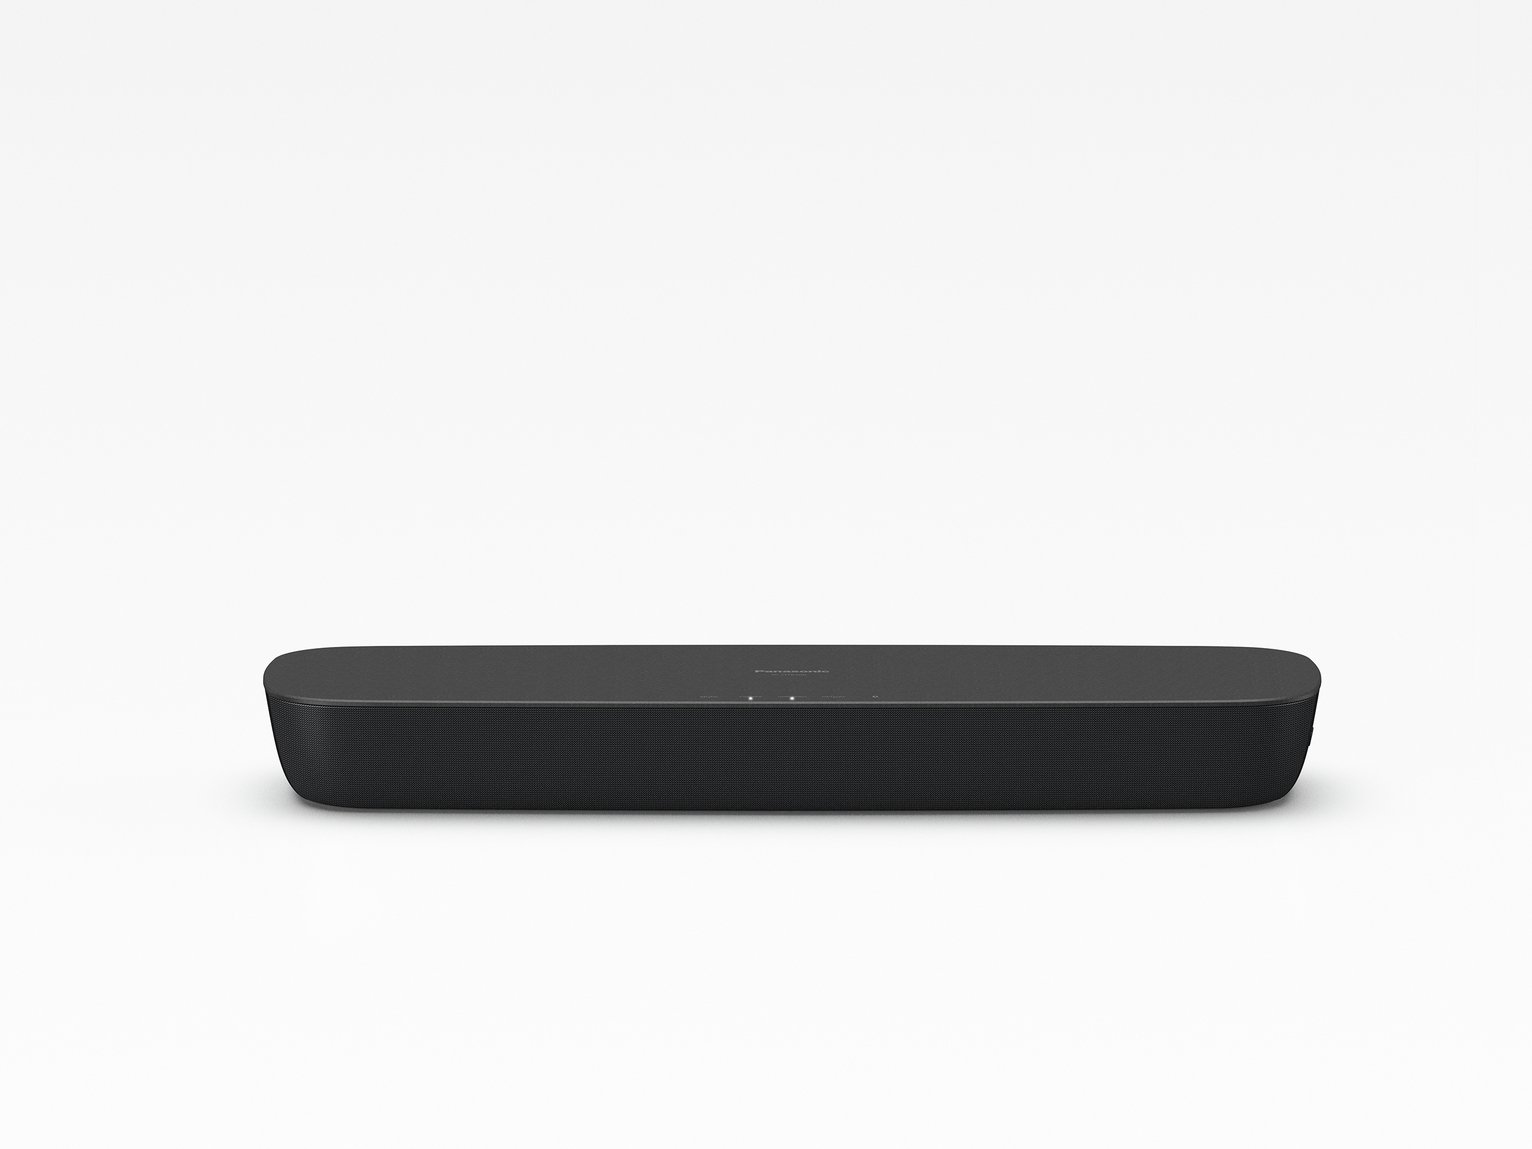 Panasonic SC-HTB200 80W RMS 2Ch All-In-One Sound Bar Review